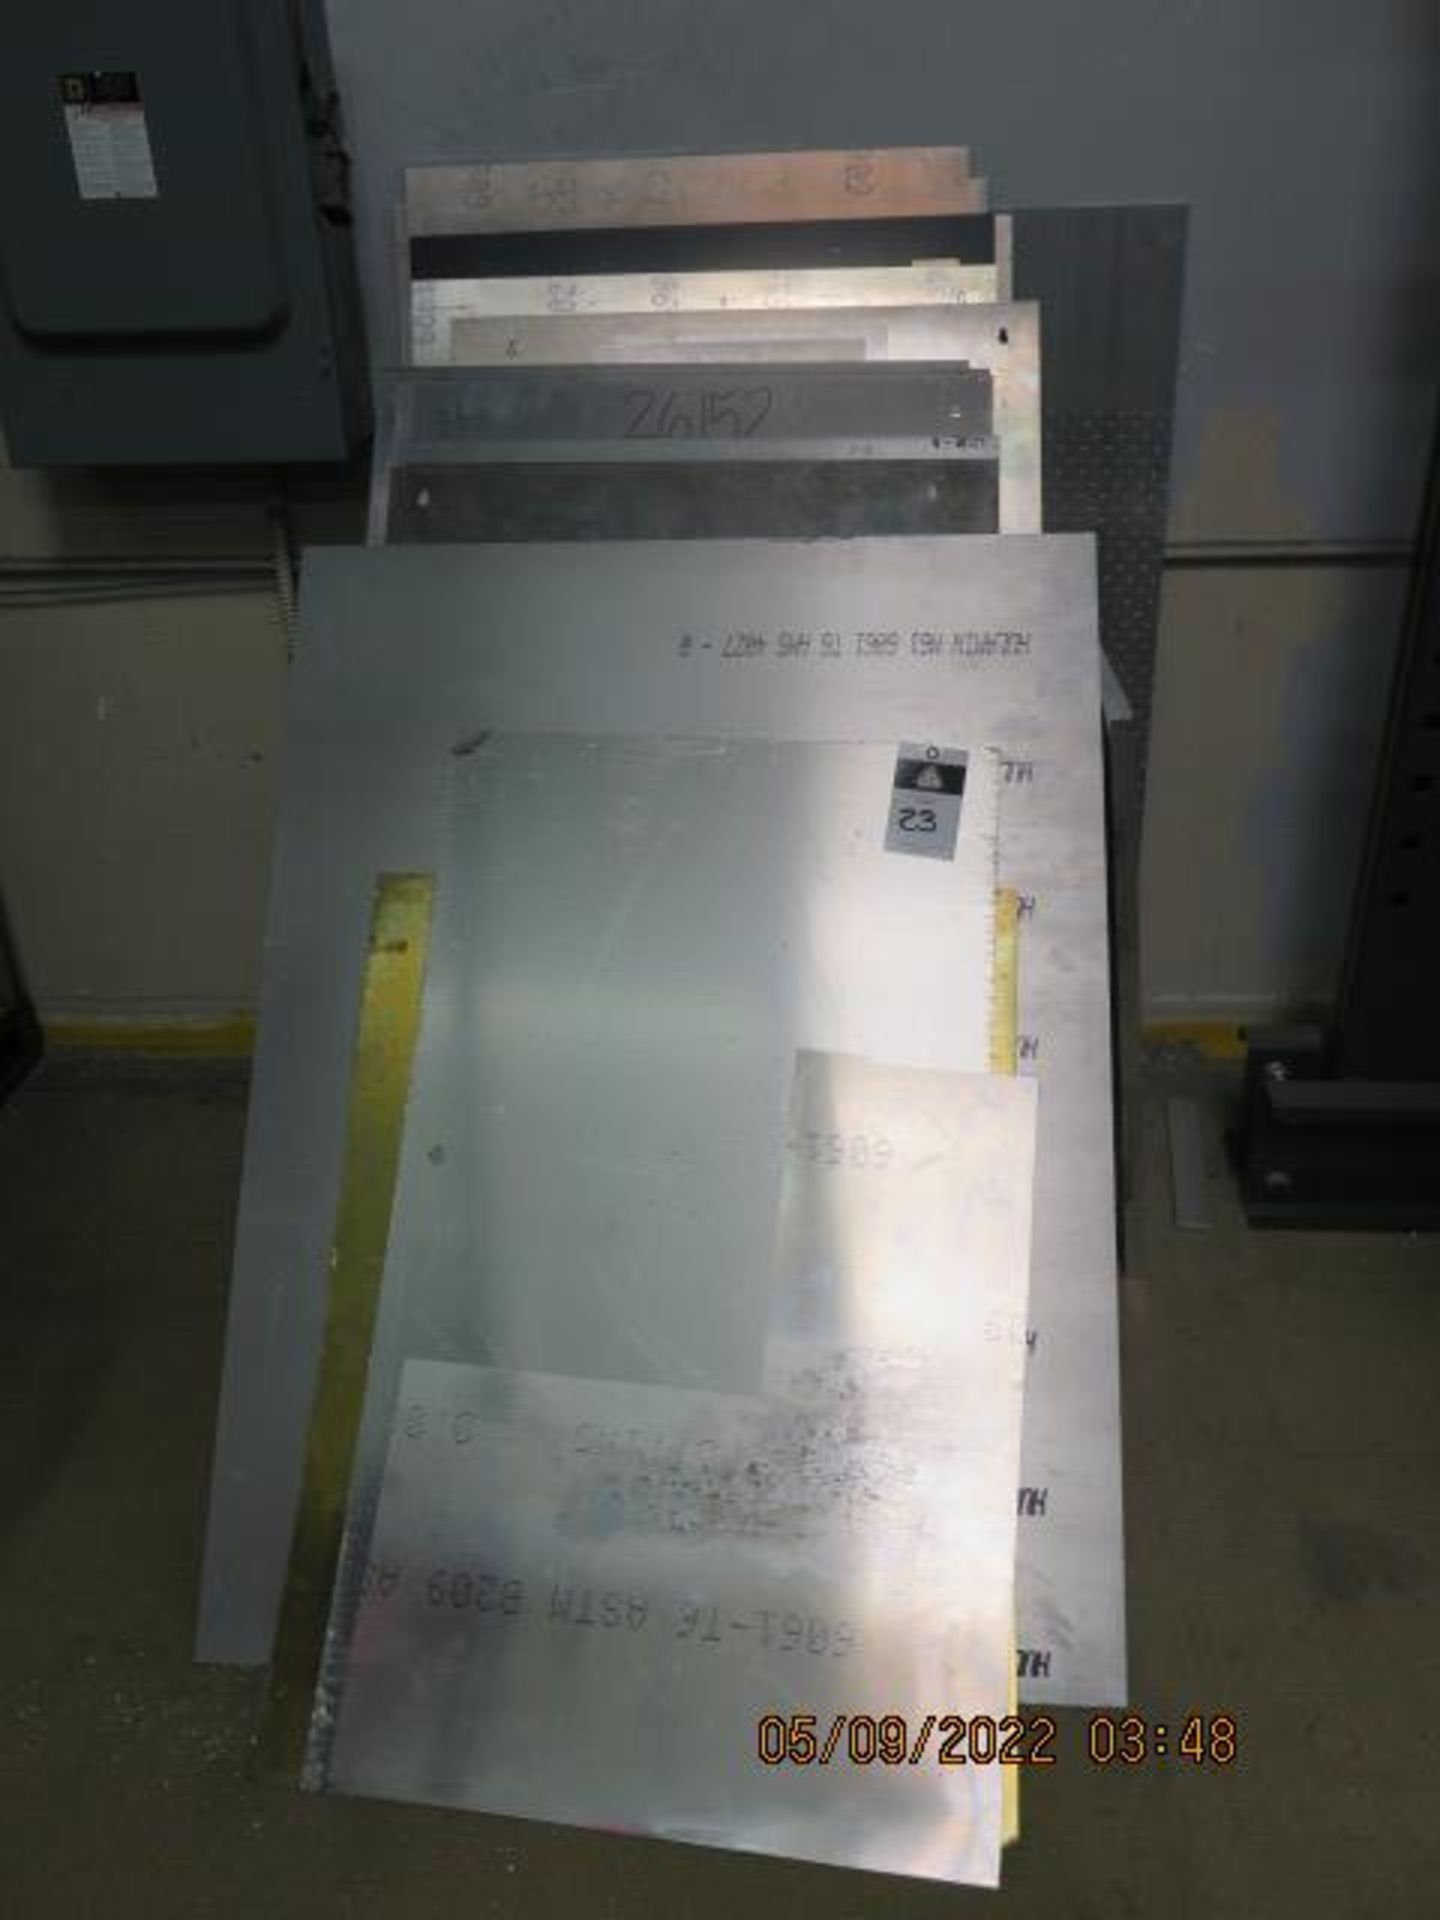 Aluminum Sheet Stock (SOLD AS-IS - NO WARRANTY) - Image 2 of 4